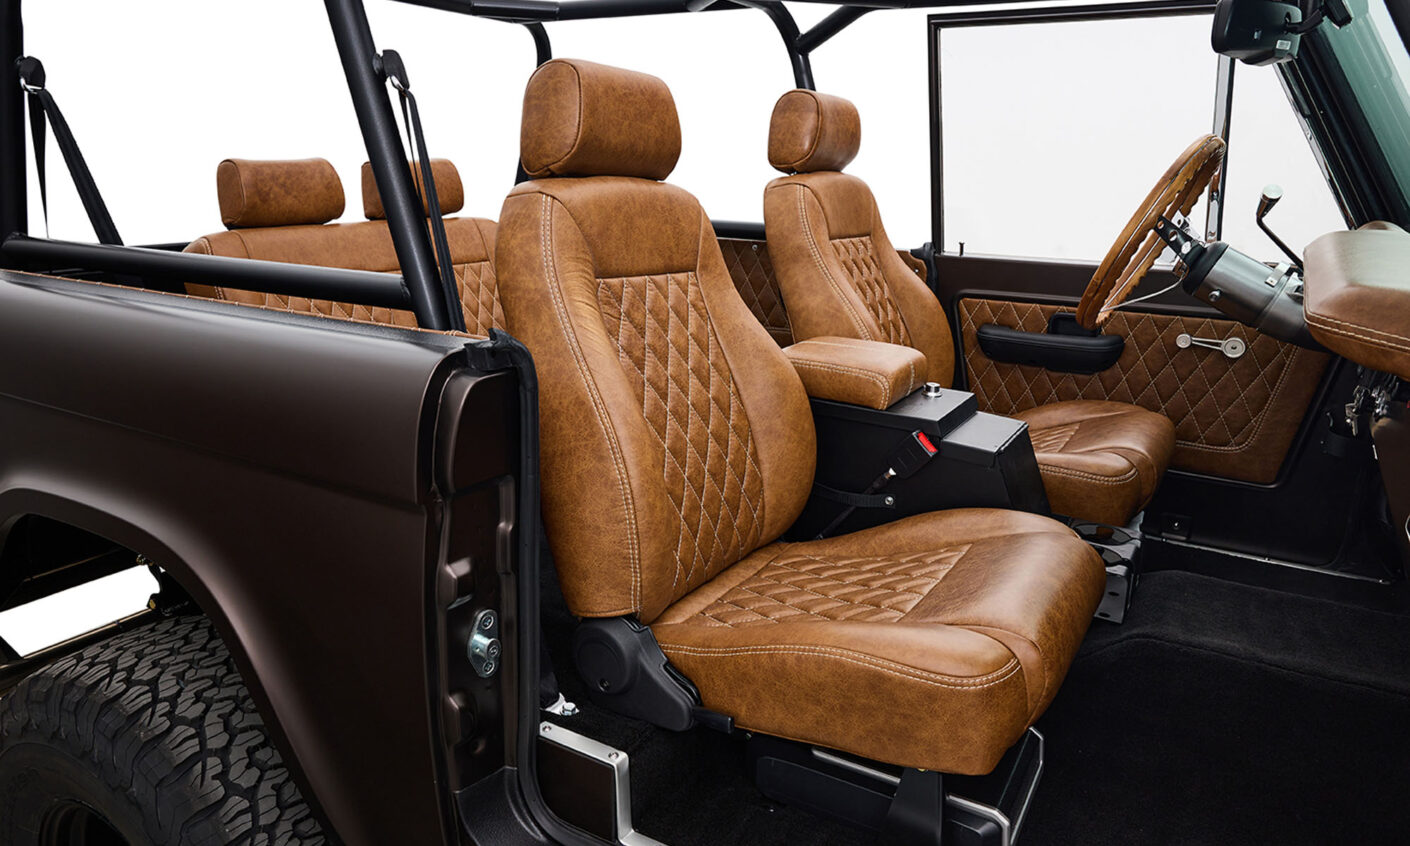 Ford Bronco 1970 in Matte Macadamia Brown with whiskey leather interior and black wheels diamond stitch